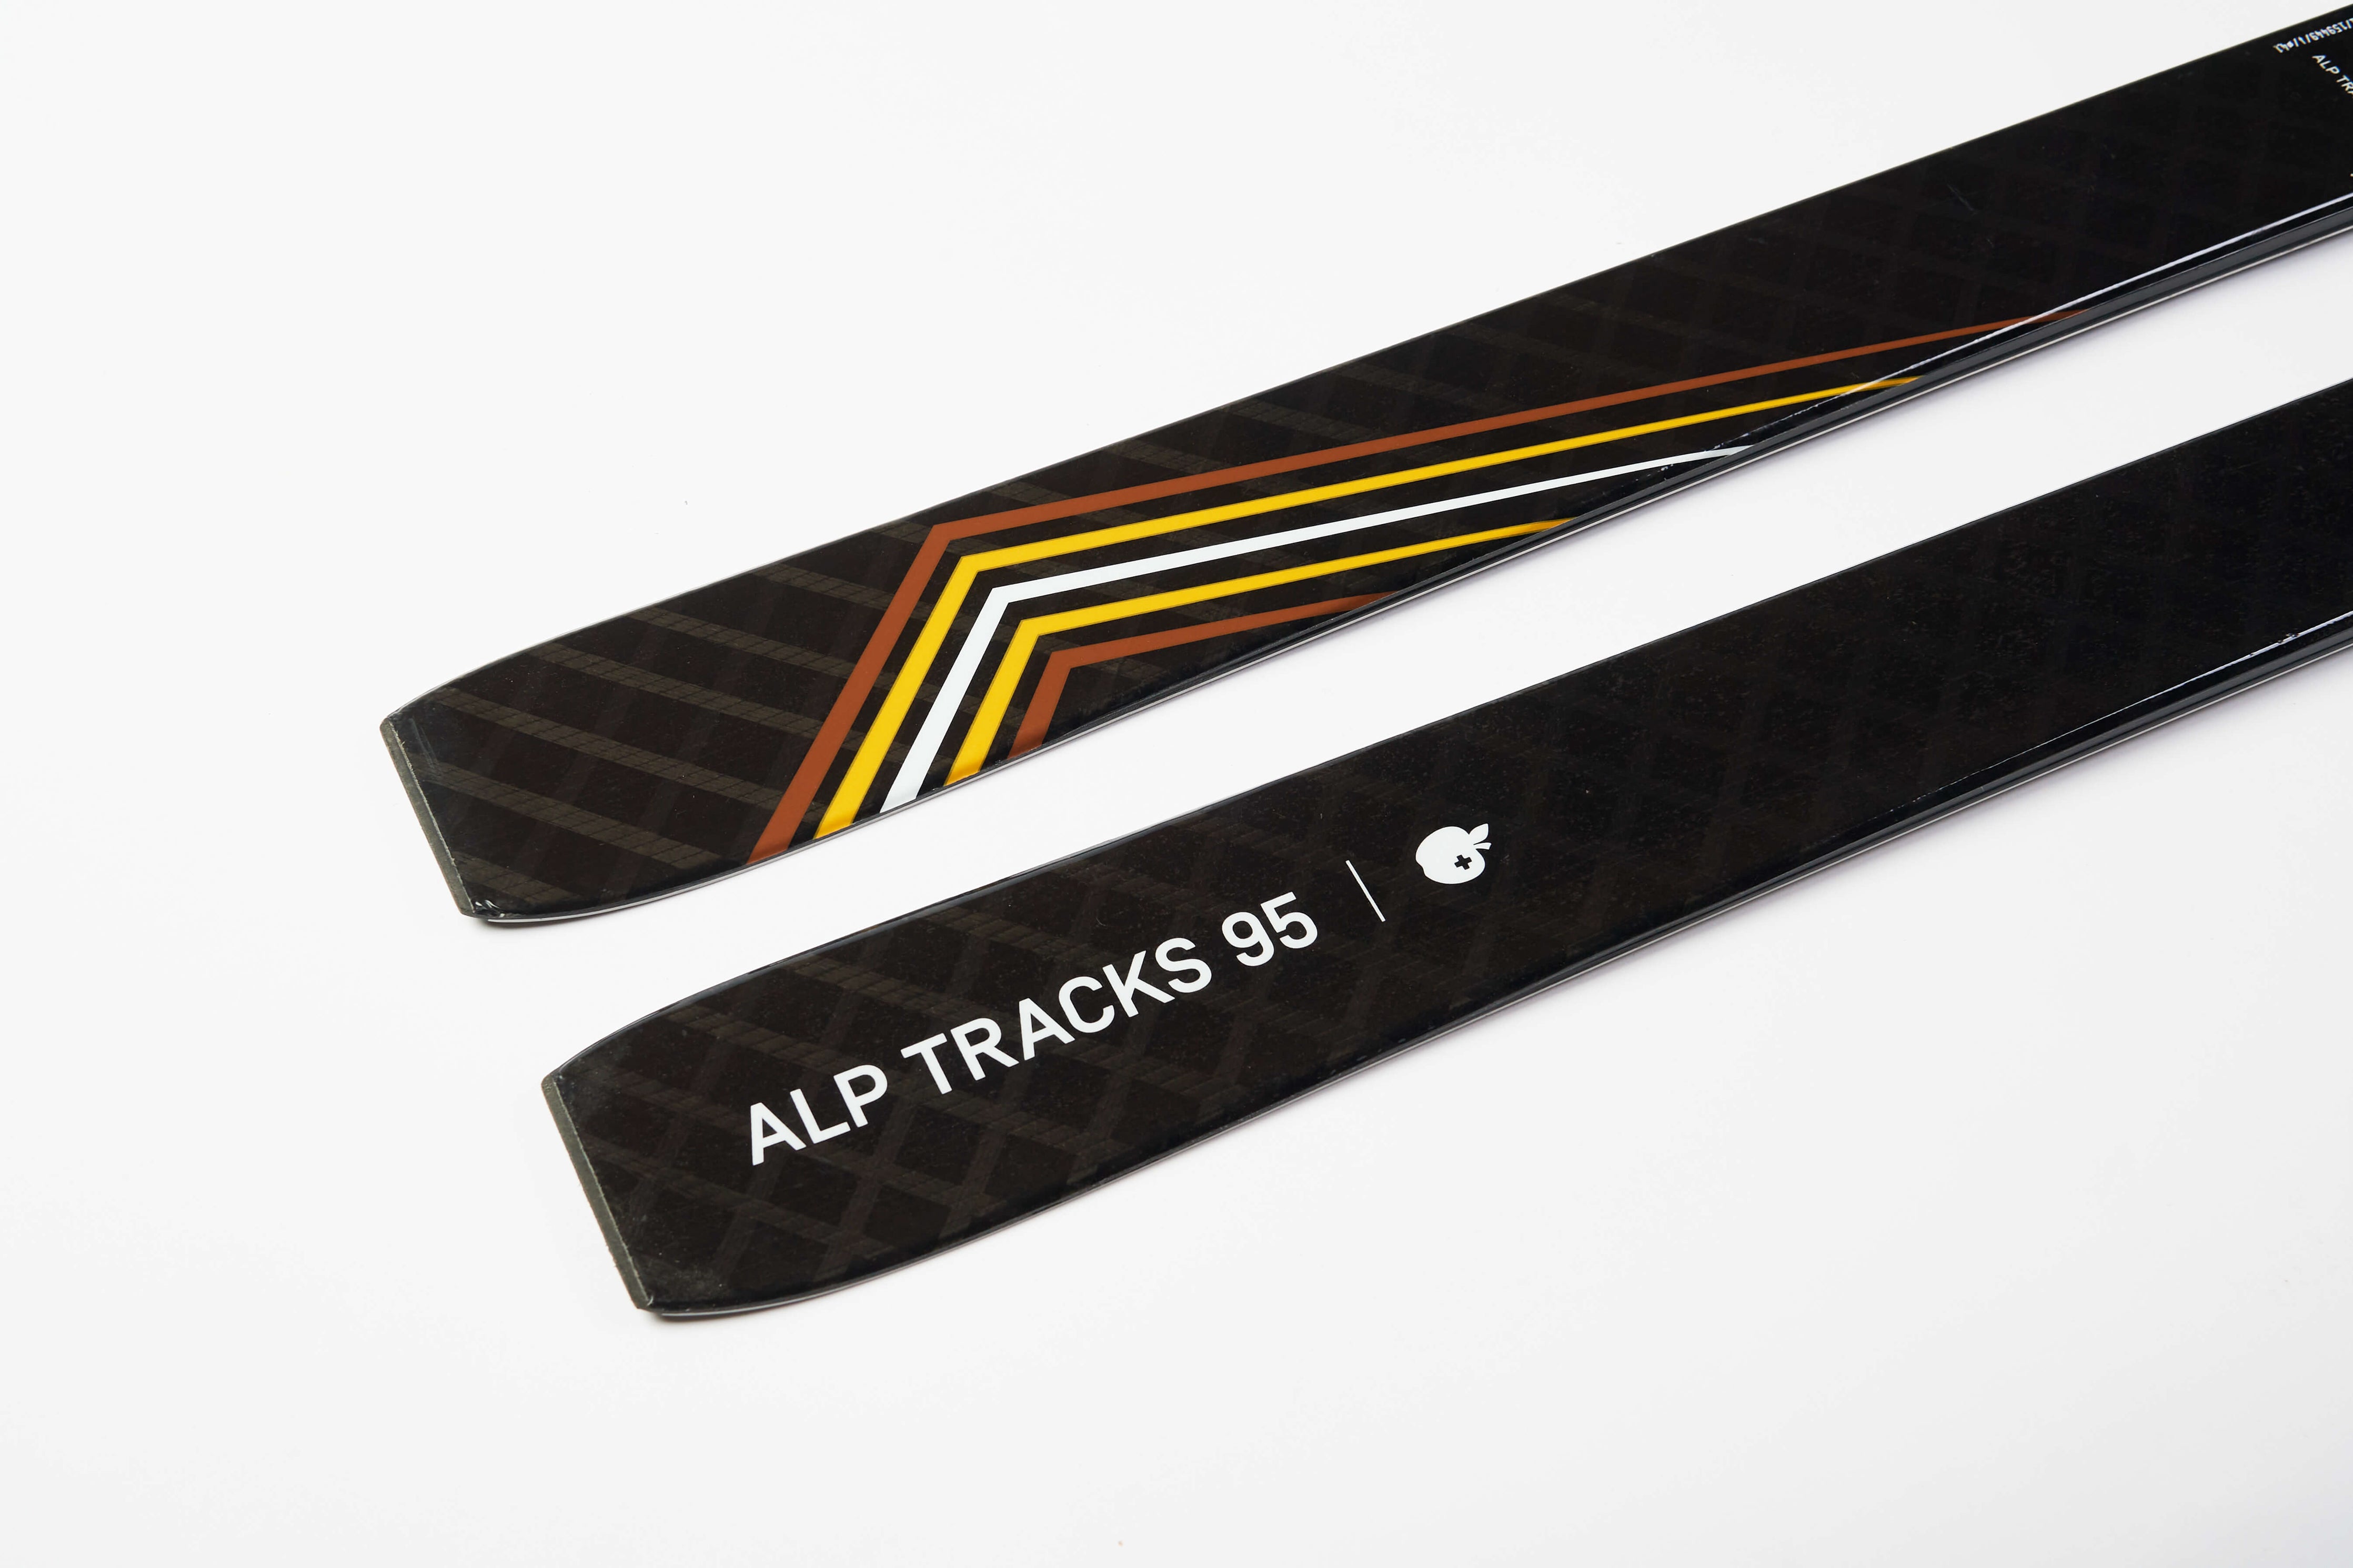 Explore new horizons with Movement&#39;s Alp Tracks 95 touring skis by my side.